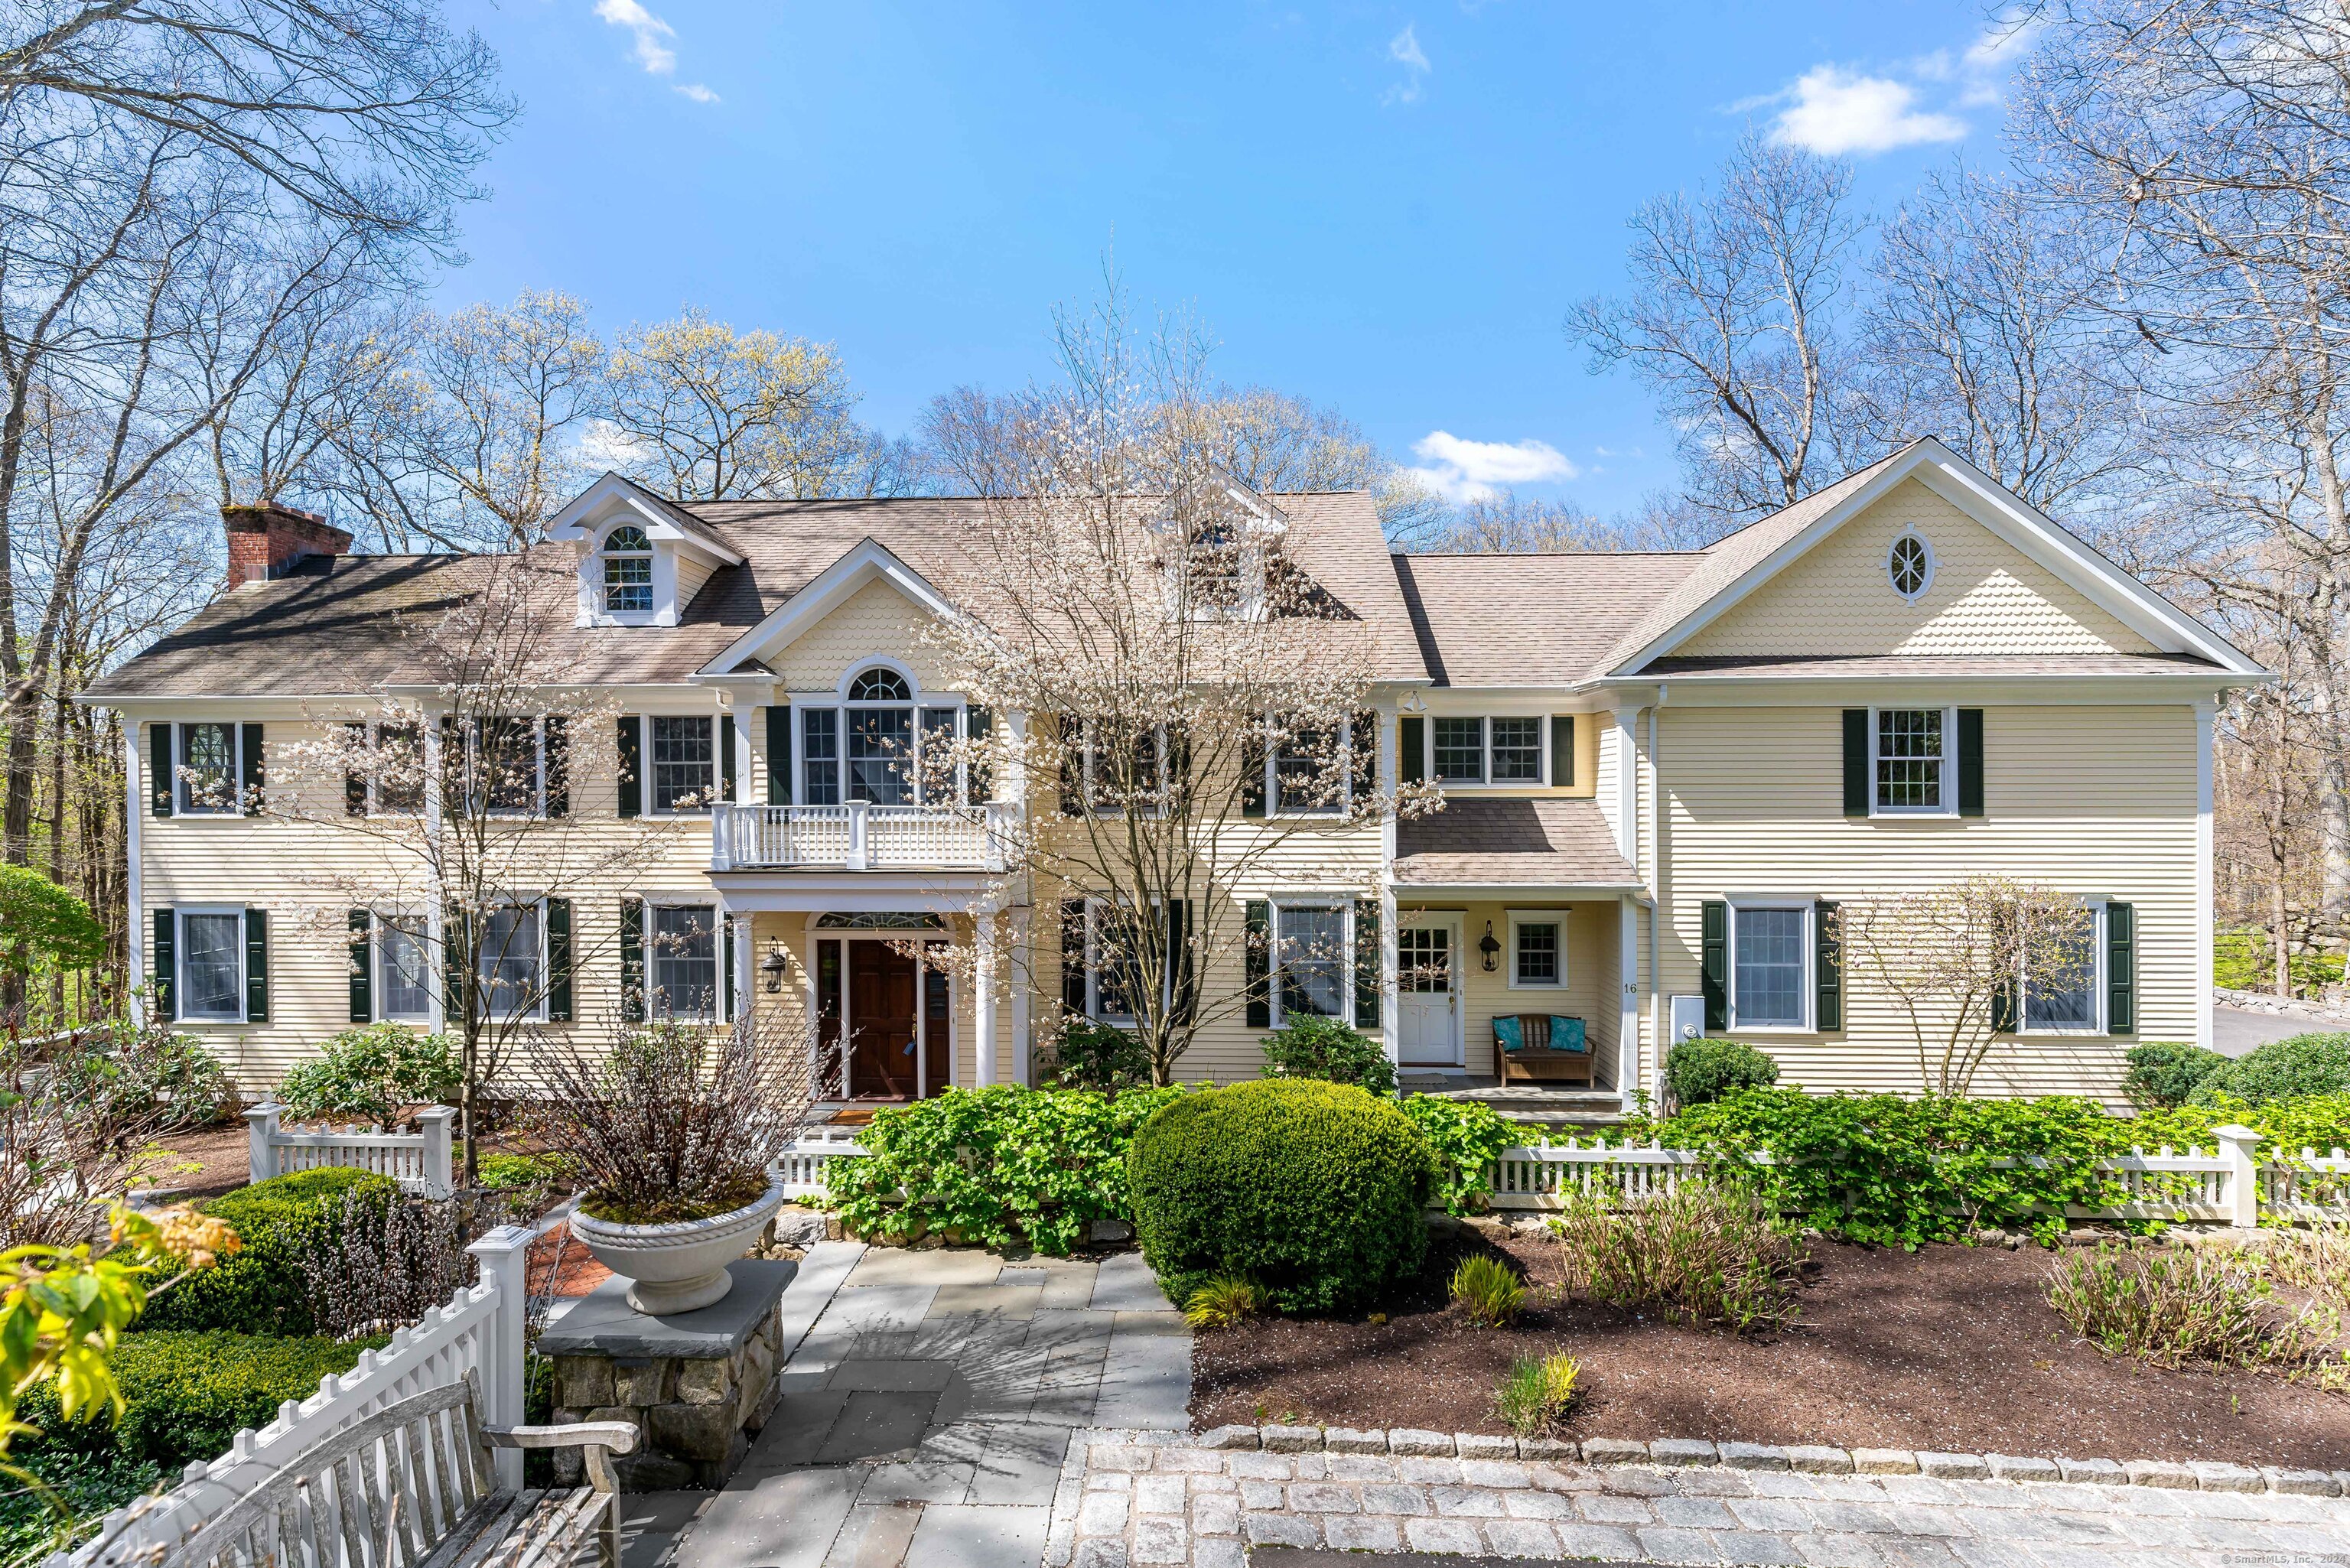 Just five minutes away from the cherished Graybarns in New Canaan, the epitome of sophistication is found in this light-filled, stately colonial in South Wilton. PUBLIC WATER and showstopping lower level are just two of the special amenities. Located in a private enclave just minutes from both New Canaan, Wilton and South Norwalk town and trains, this "levelled up" home offers both neighborhood and privacy, overlooking the woods. The kitchen includes beveled Quartzite countertops, Wolf induction cooktop, beverage cooler, warming drawer, plentiful storage, high-end Bremtown 700 series custom cabinets and a custom built burlwood entertainment and storage cabinet. The adjacent sun-filled family room with stone fireplace includes entrance to the upper patio, with built-in kitchen. Library with custom cabinetry and 120-bottle Sub-Zero wine cooler is the perfect place to solve the problems of the world over a fine wine. The 1st floor office provides a quiet space for funding the problem solving! The Primary Suite includes 10' ceilings and separate grand sitting room with beams, fireplace, ambient lighting, full bath and walk-in closet--a true sanctuary. Four additional bedrooms on the second floor and two full baths provide space for family and friends. The walk-out lower level is a stunner-with large center island with leathered granite countertops, conv/micro oven, dishwasher, wine cooler and ice maker. The owners invested heavily in the oversized patios and landscaping. A gem!